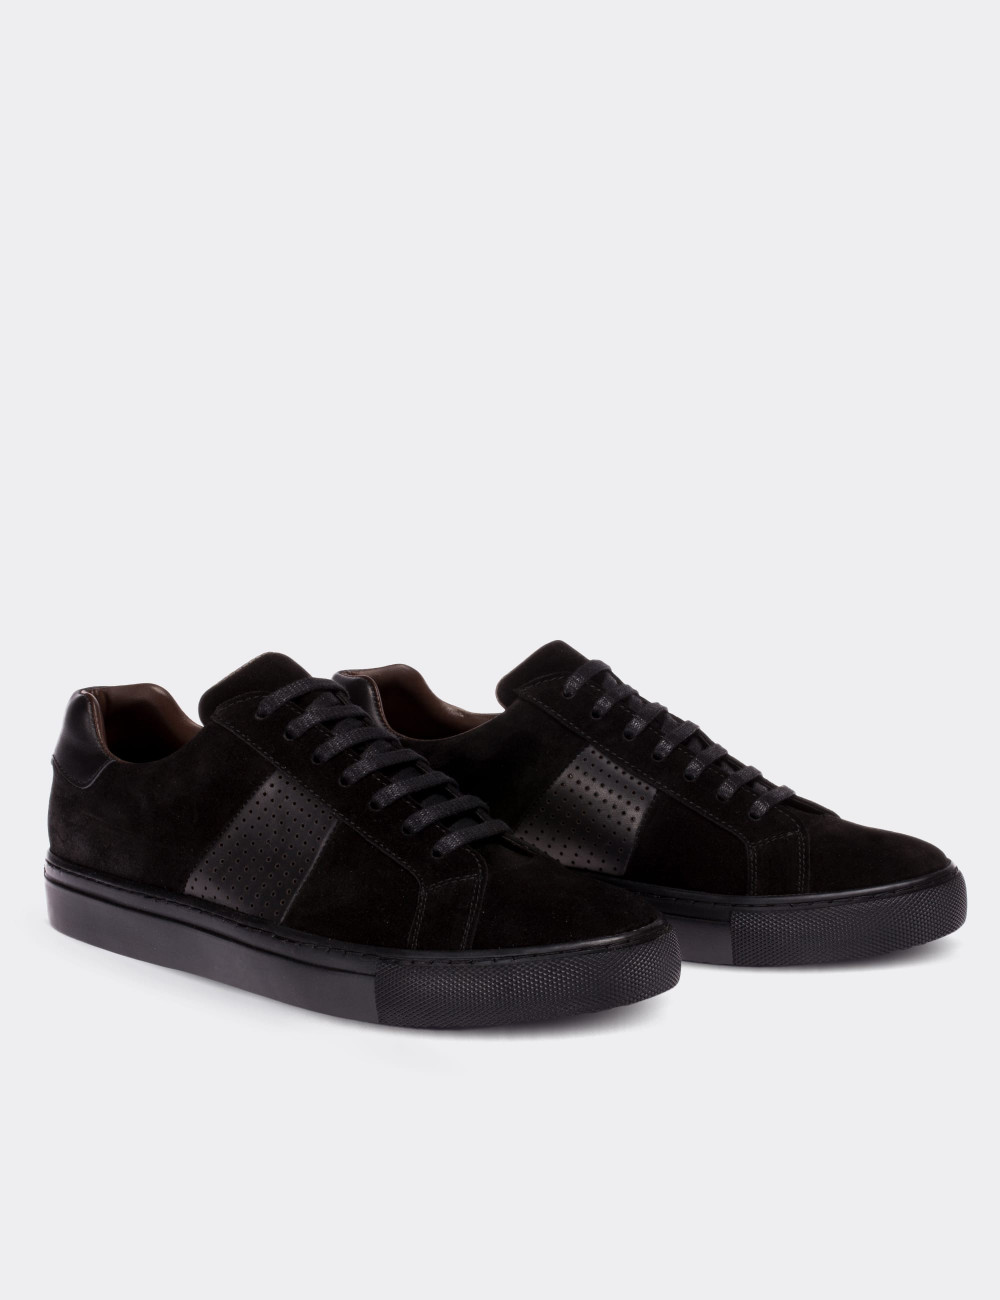 Black Suede Leather Sneakers - 01740MSYHC01